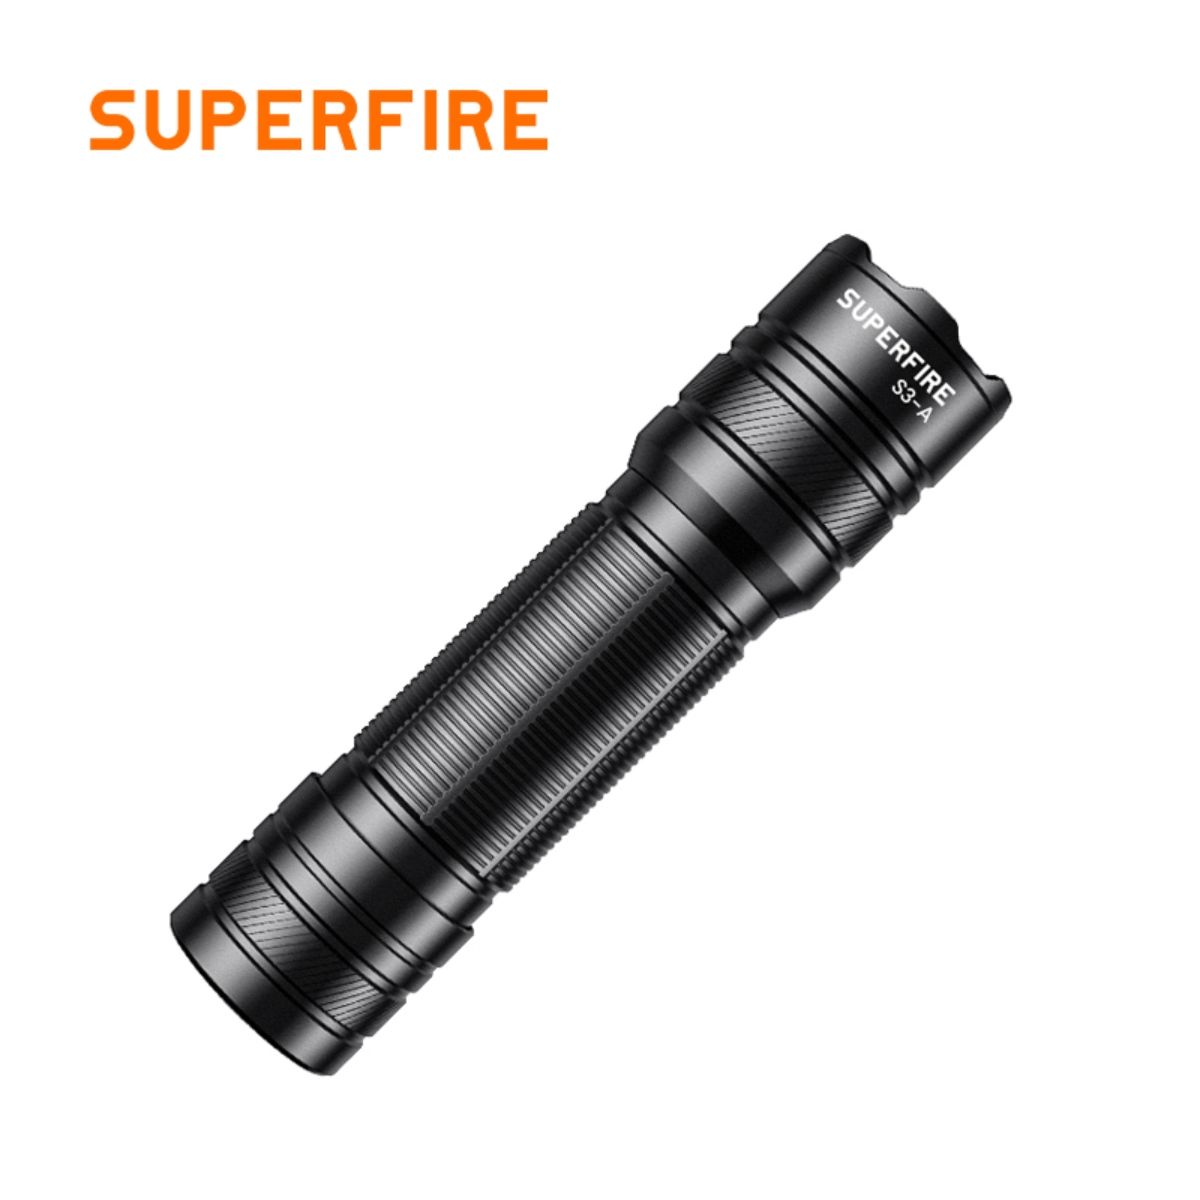 S3-A Dry lithium universal zoomable led Flashlight